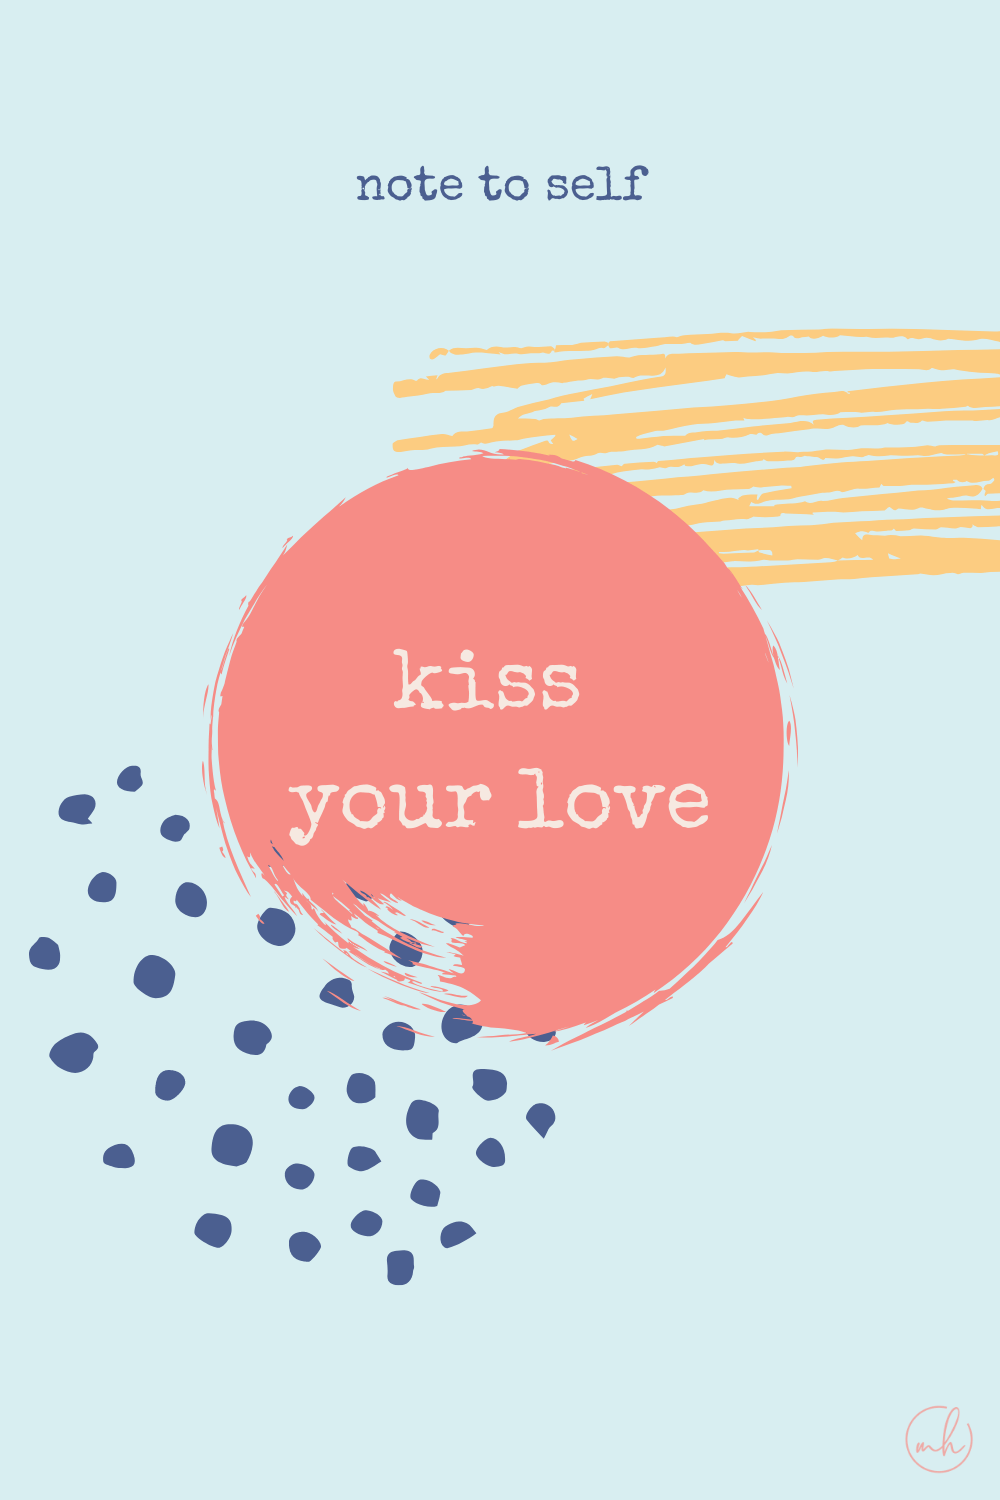 Kiss your love - Note to self quotes | myhoogah